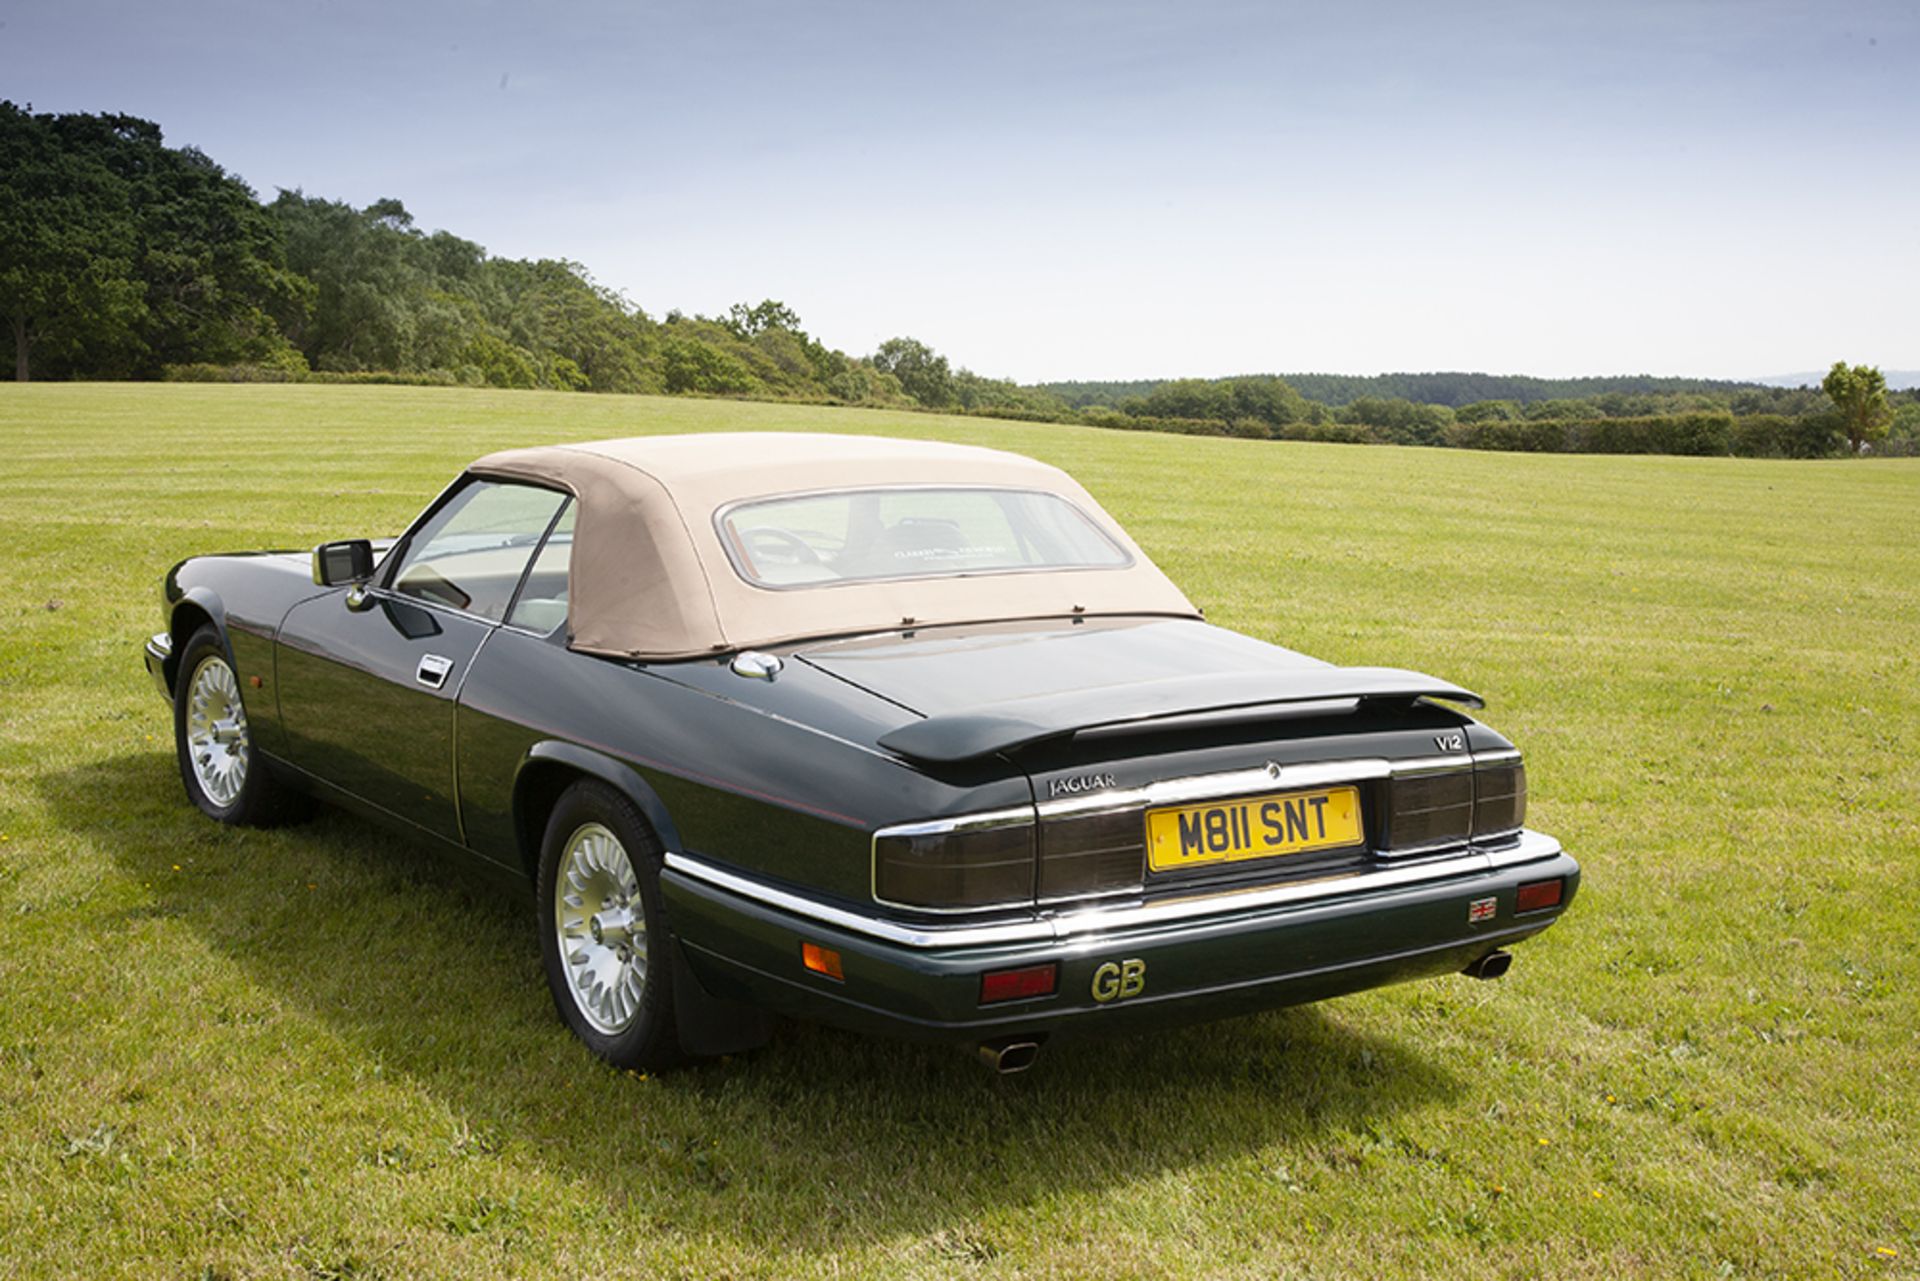 1994 Jaguar XJS V12 Convertible - in fine condition - Image 4 of 13